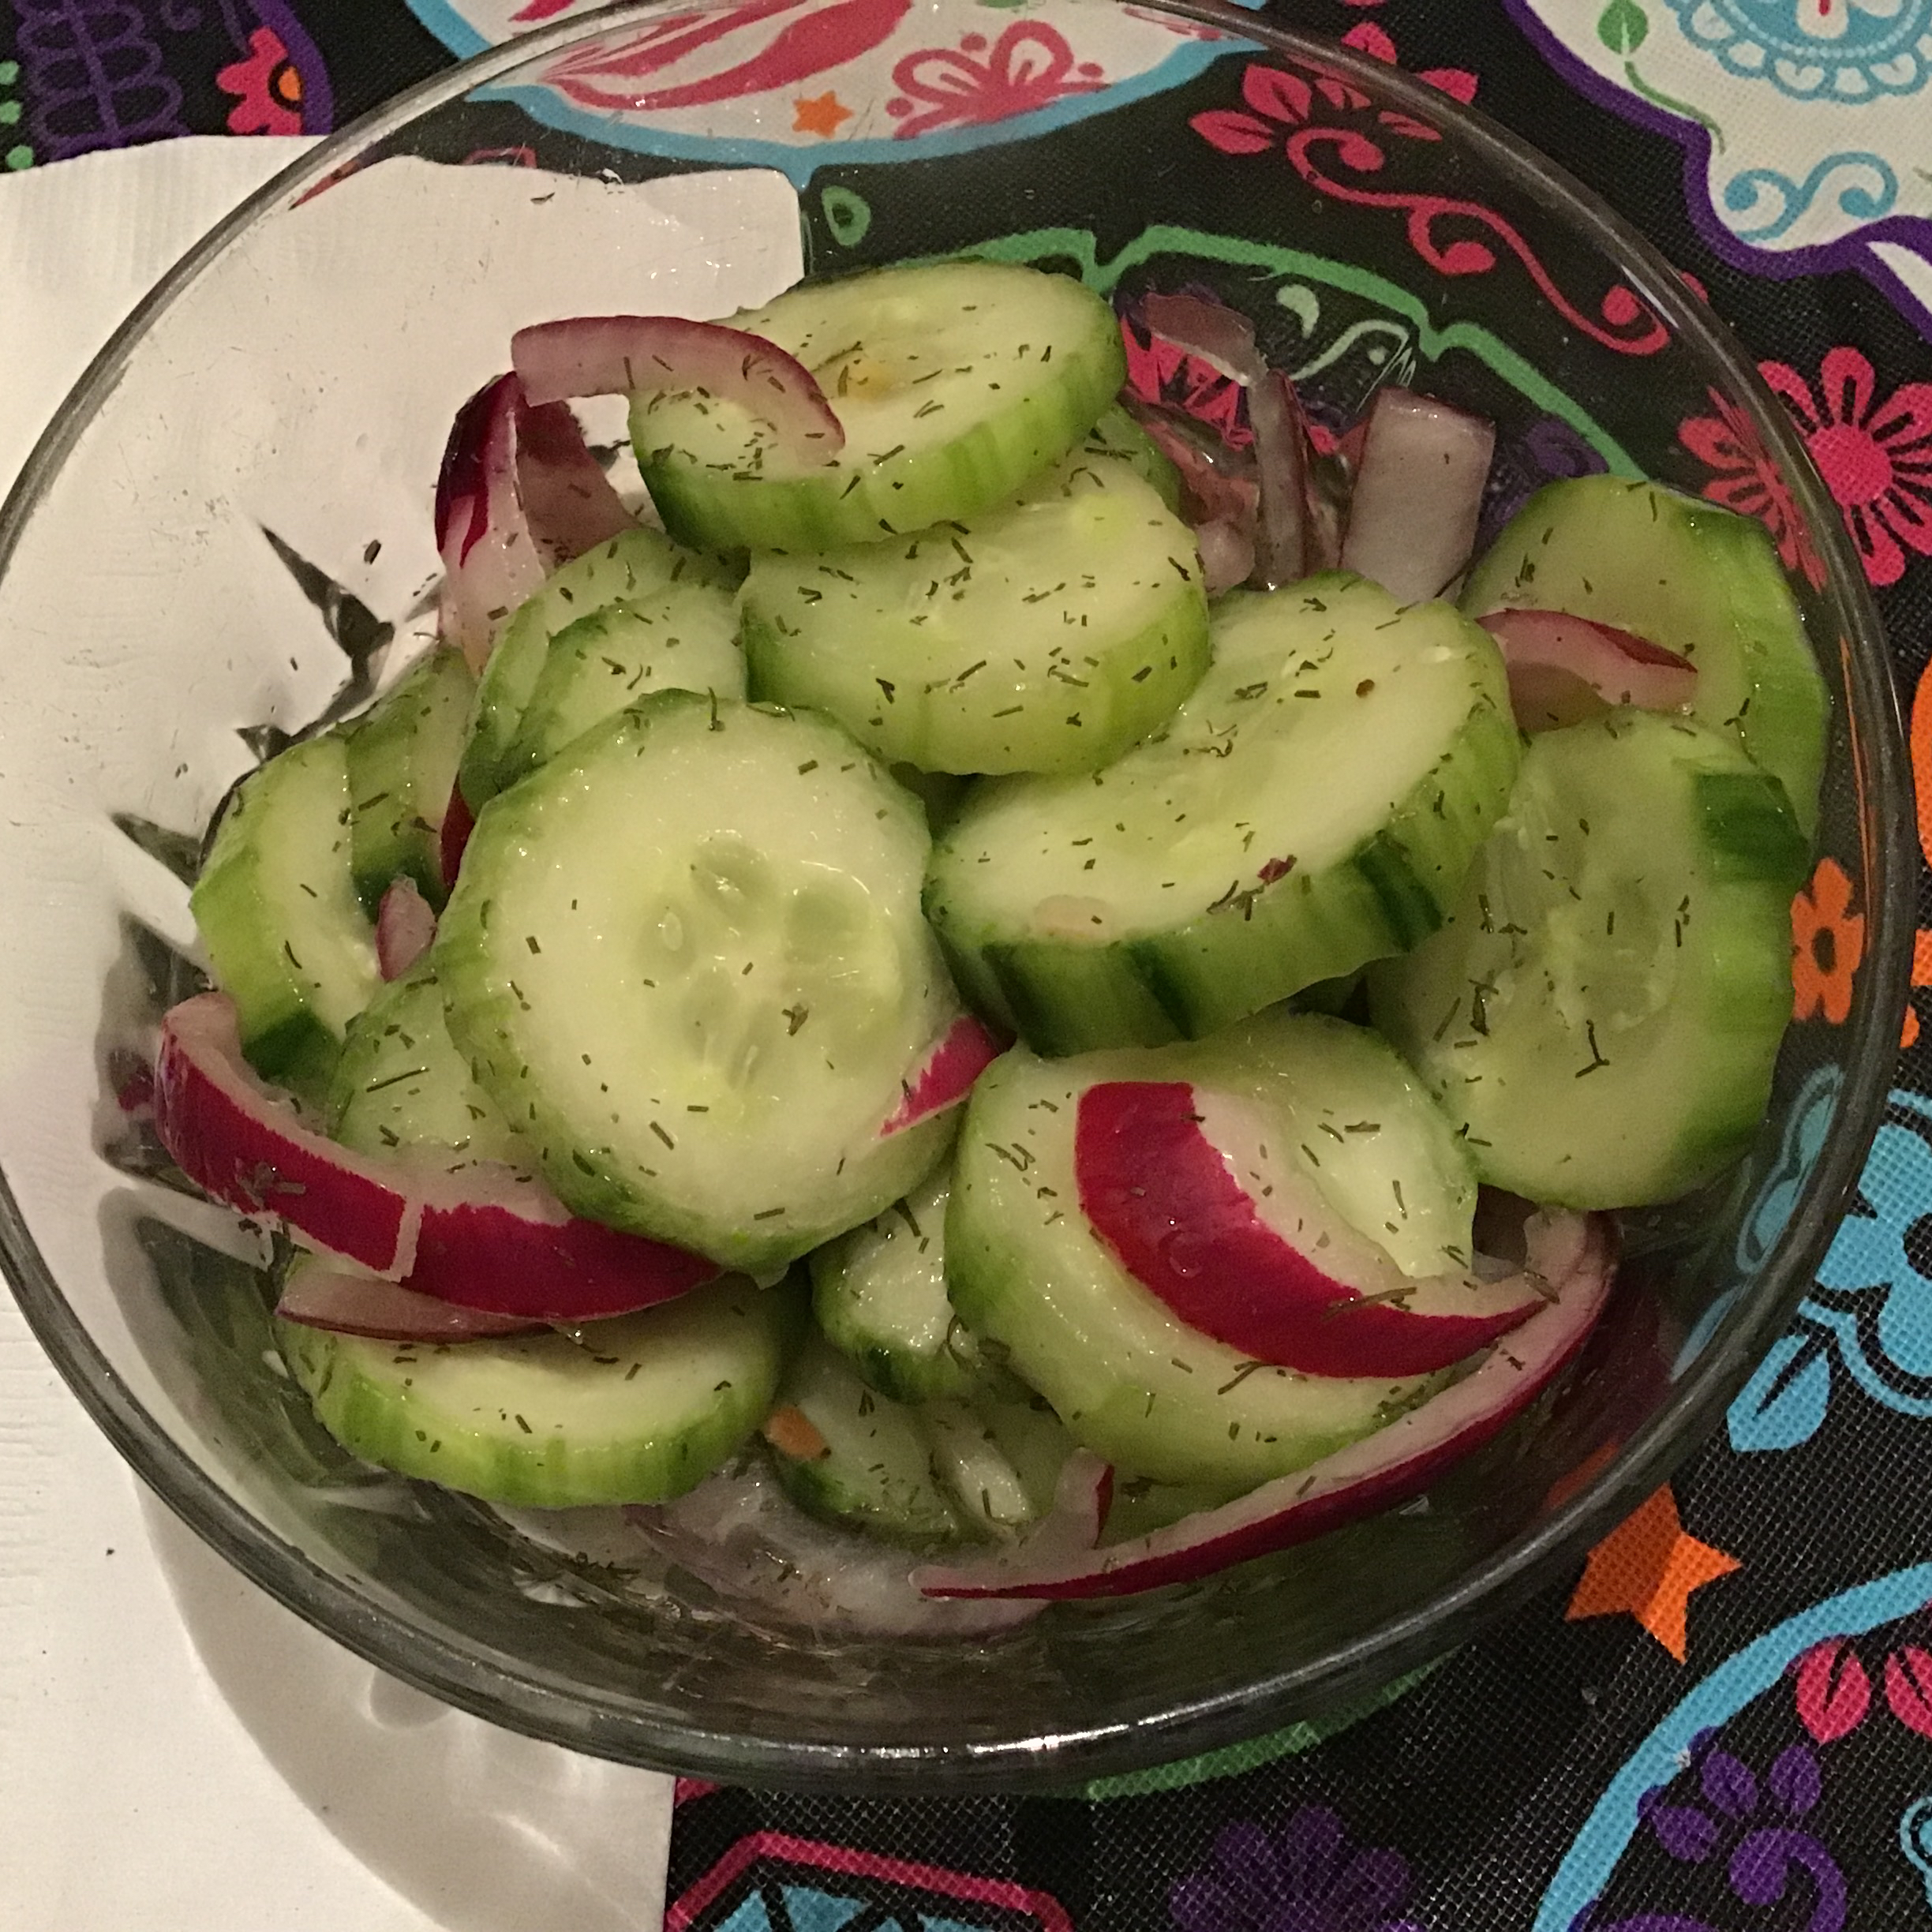 Cucumber Slices With Dill jennkrid613